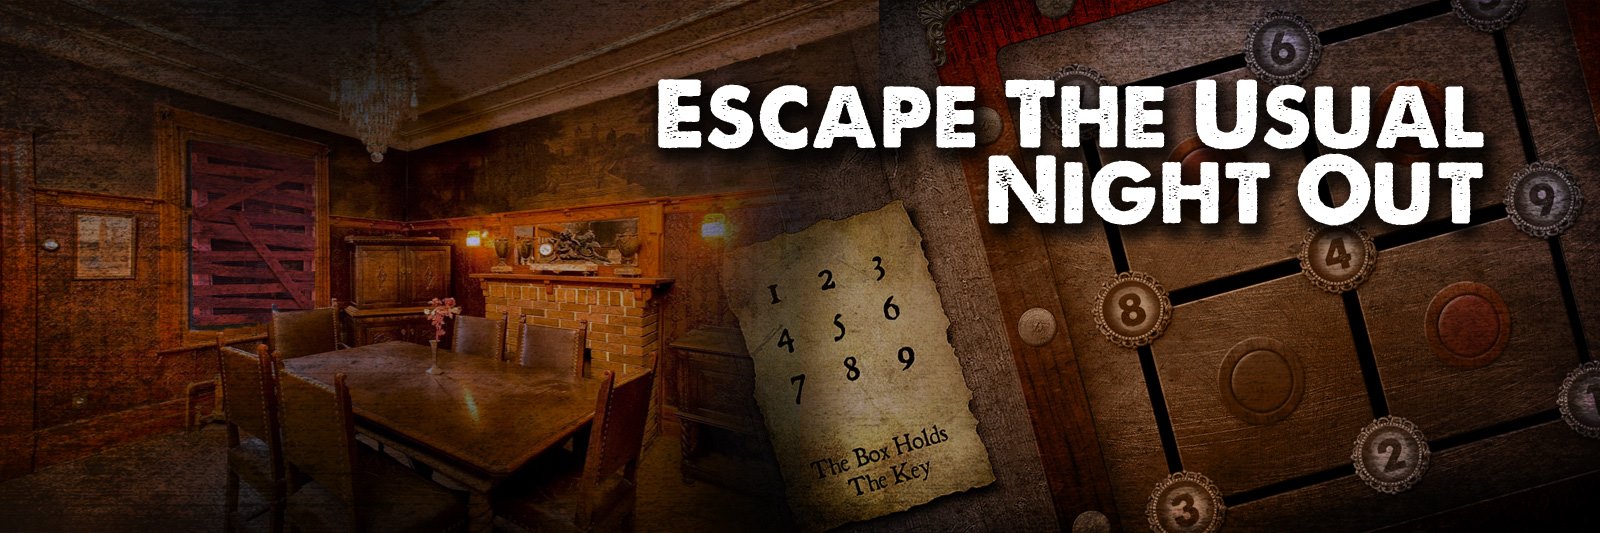 Create Beautiful Family Memories by Playing Escape Room Games